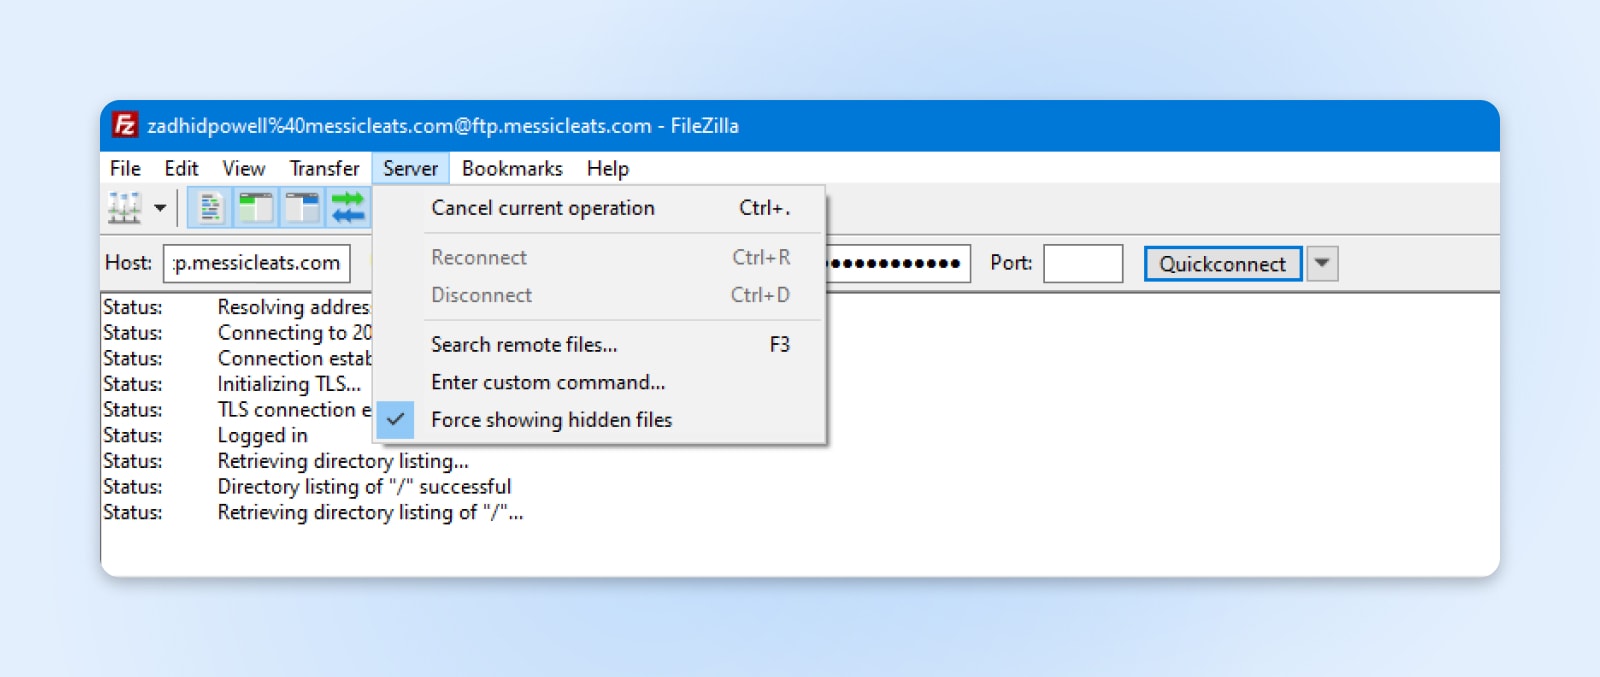 FileZilla's dropdown menu after clicking "Server" with the "Force showing hidden files" option enabled. 